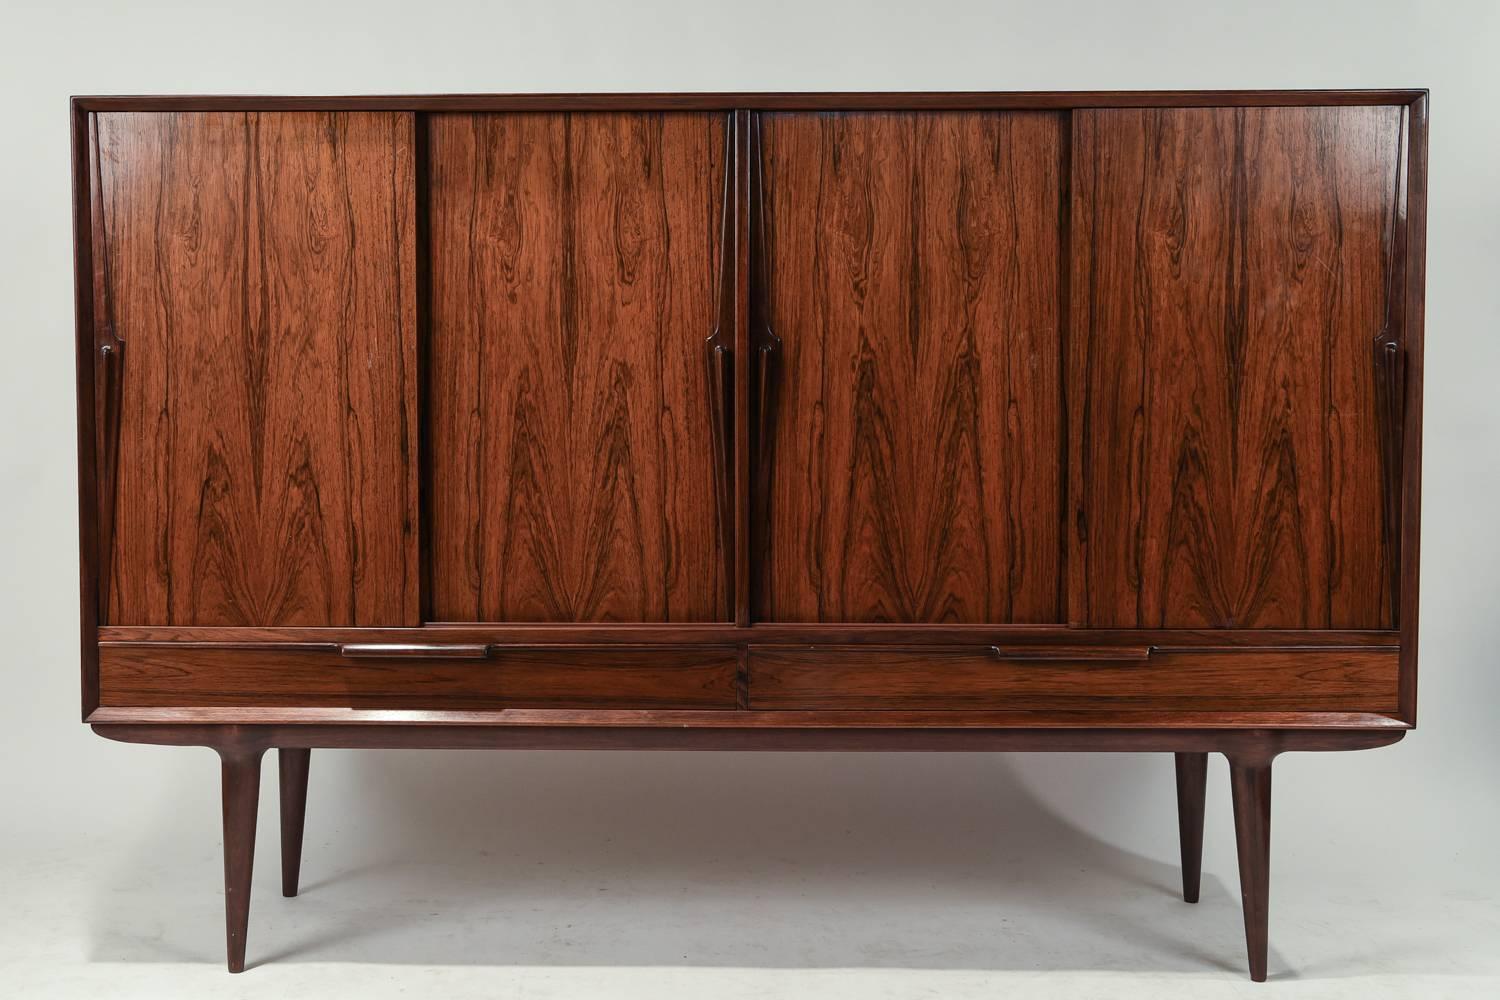 This Danish Mid-Century Model 13 sideboard was designed in the 1960s by Gunni Omann for Gunni Omann Jr. It is crafted of rosewood.